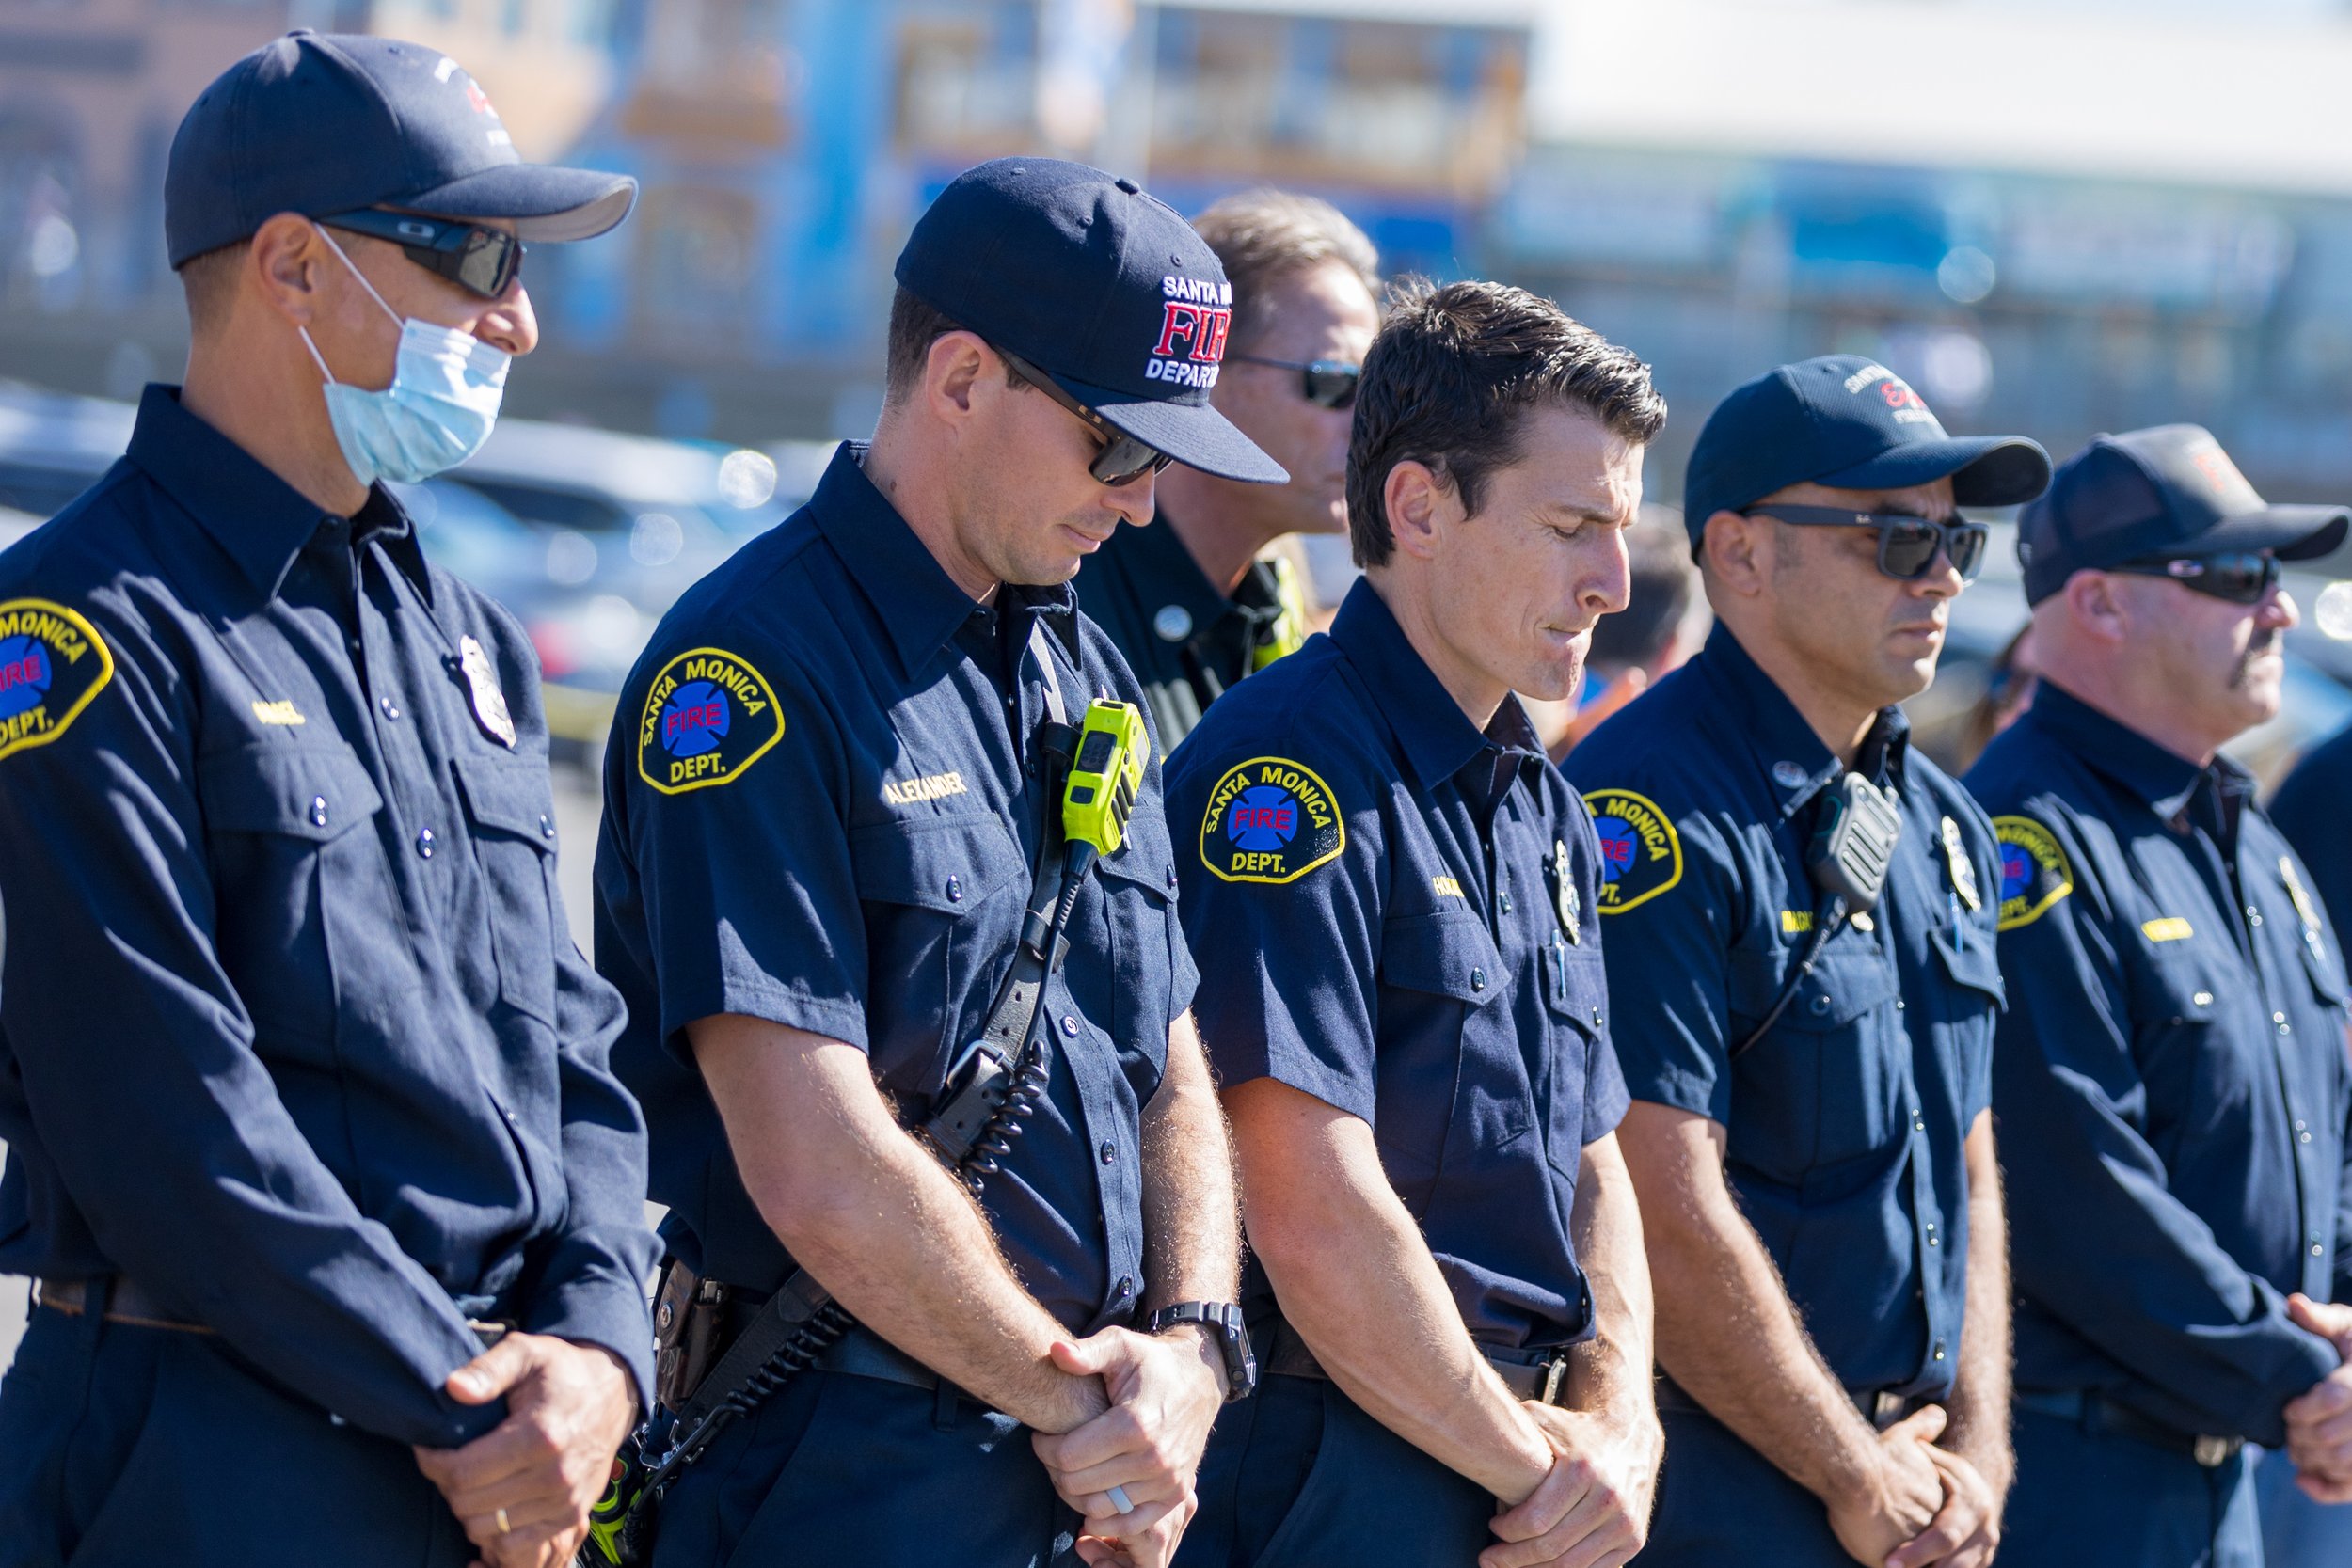  Members of the Santa Monica fire department take a moment of silence at the Veterans Day commemoration near the Santa Monica Pier in Santa Monica, California on November 11, 2021. (Maxim Elramsisy | The Corsair) 